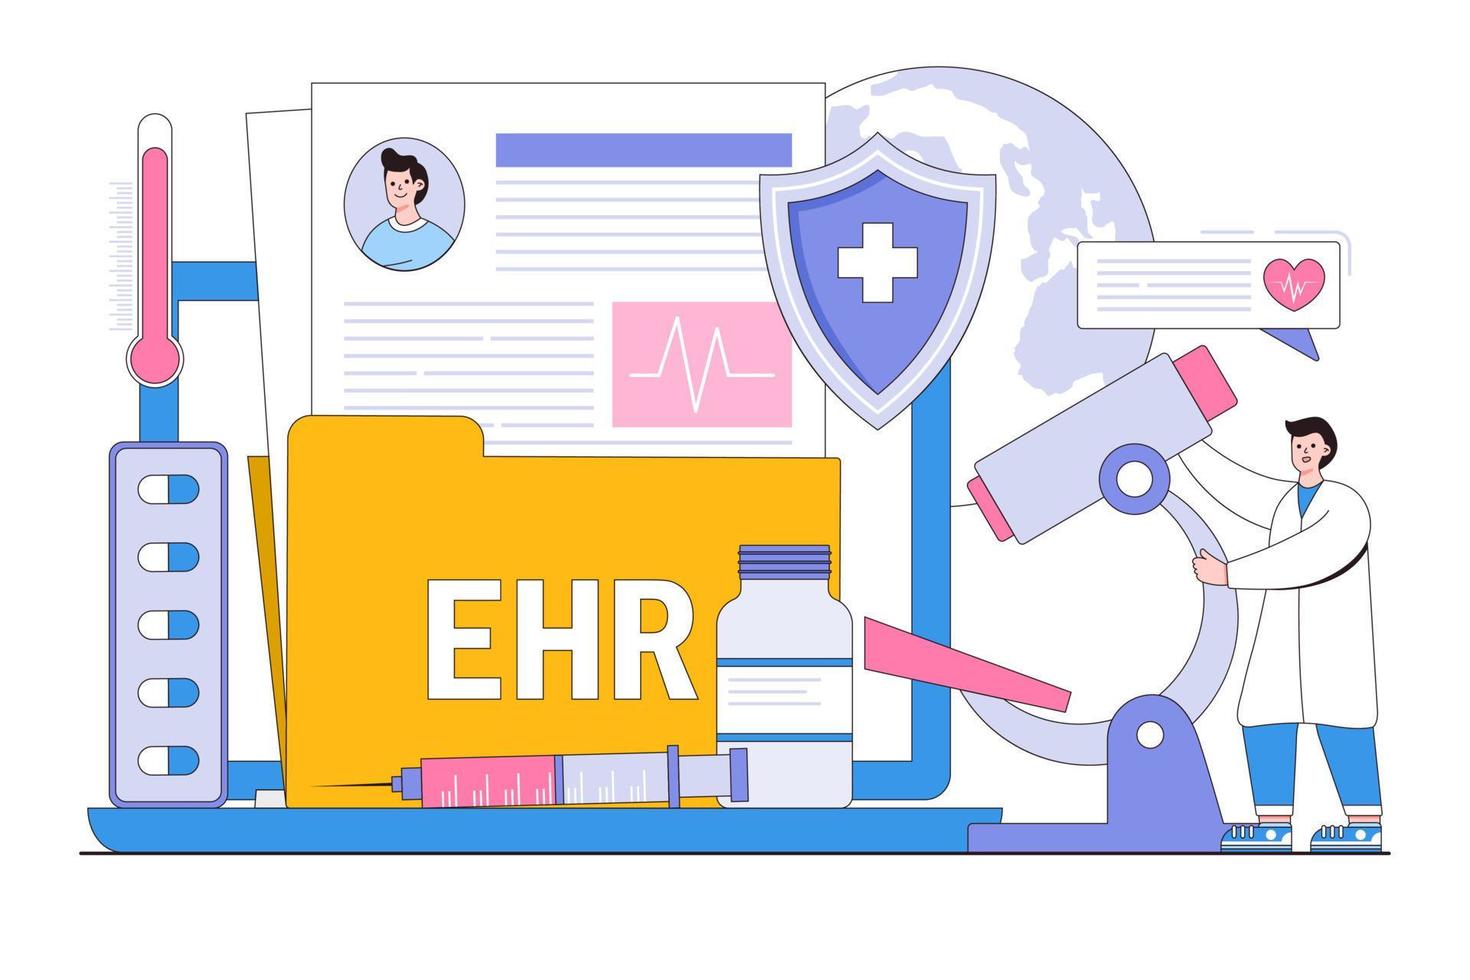 EHR - Electronic Health Record, Electronically-Stored Patient health information concept with doctor character. Outline design style minimal vector illustration for landing page, hero images